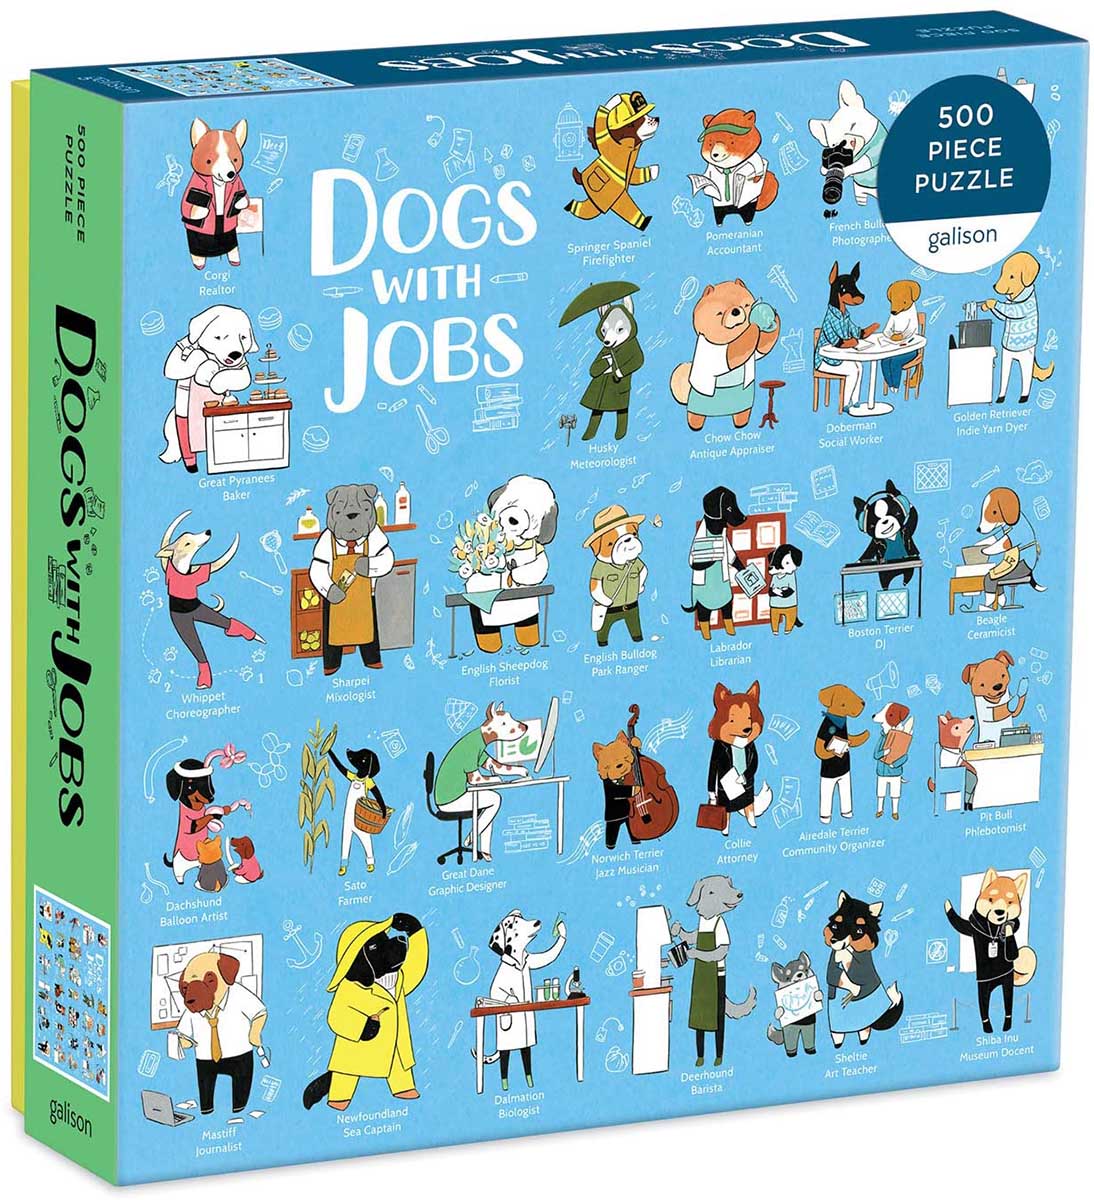 box with animals illustrating different jobs